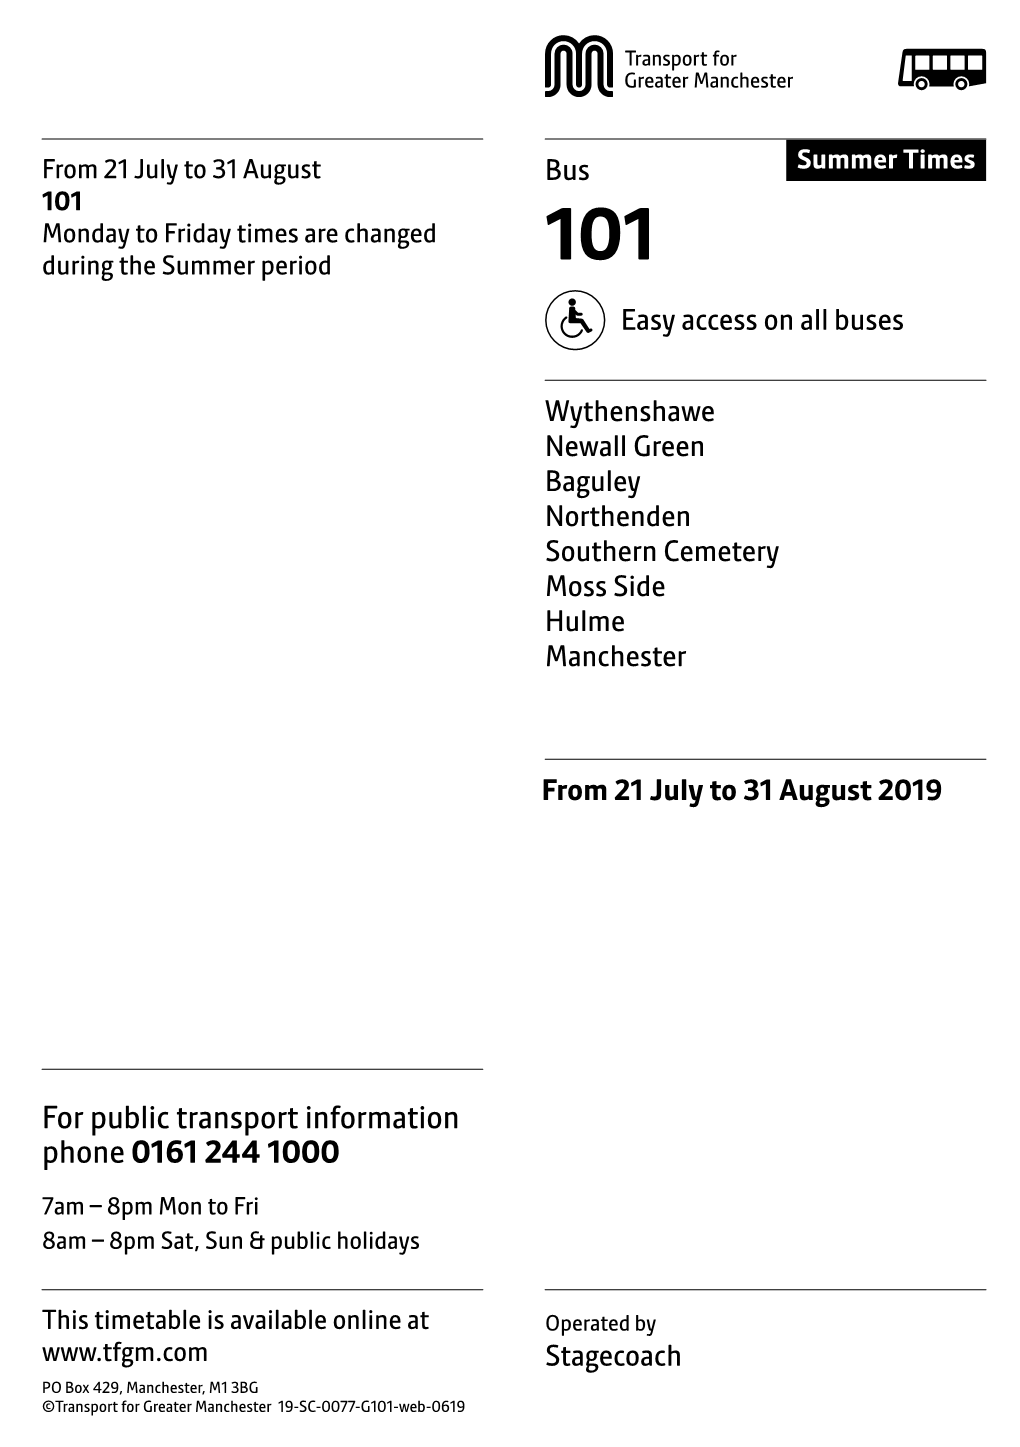 101 Monday to Friday Times Are Changed During the Summer Period 101 Easy Access on All Buses